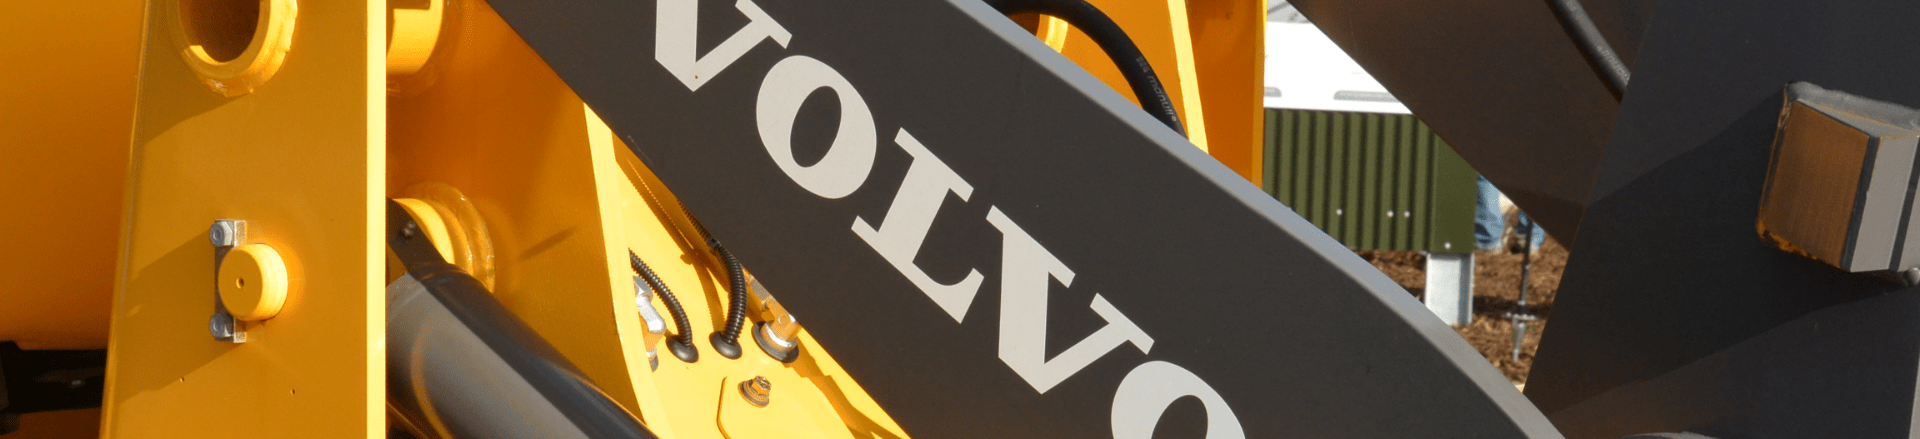 A close up of a yellow machine with custom labels featuring the word Volvo.